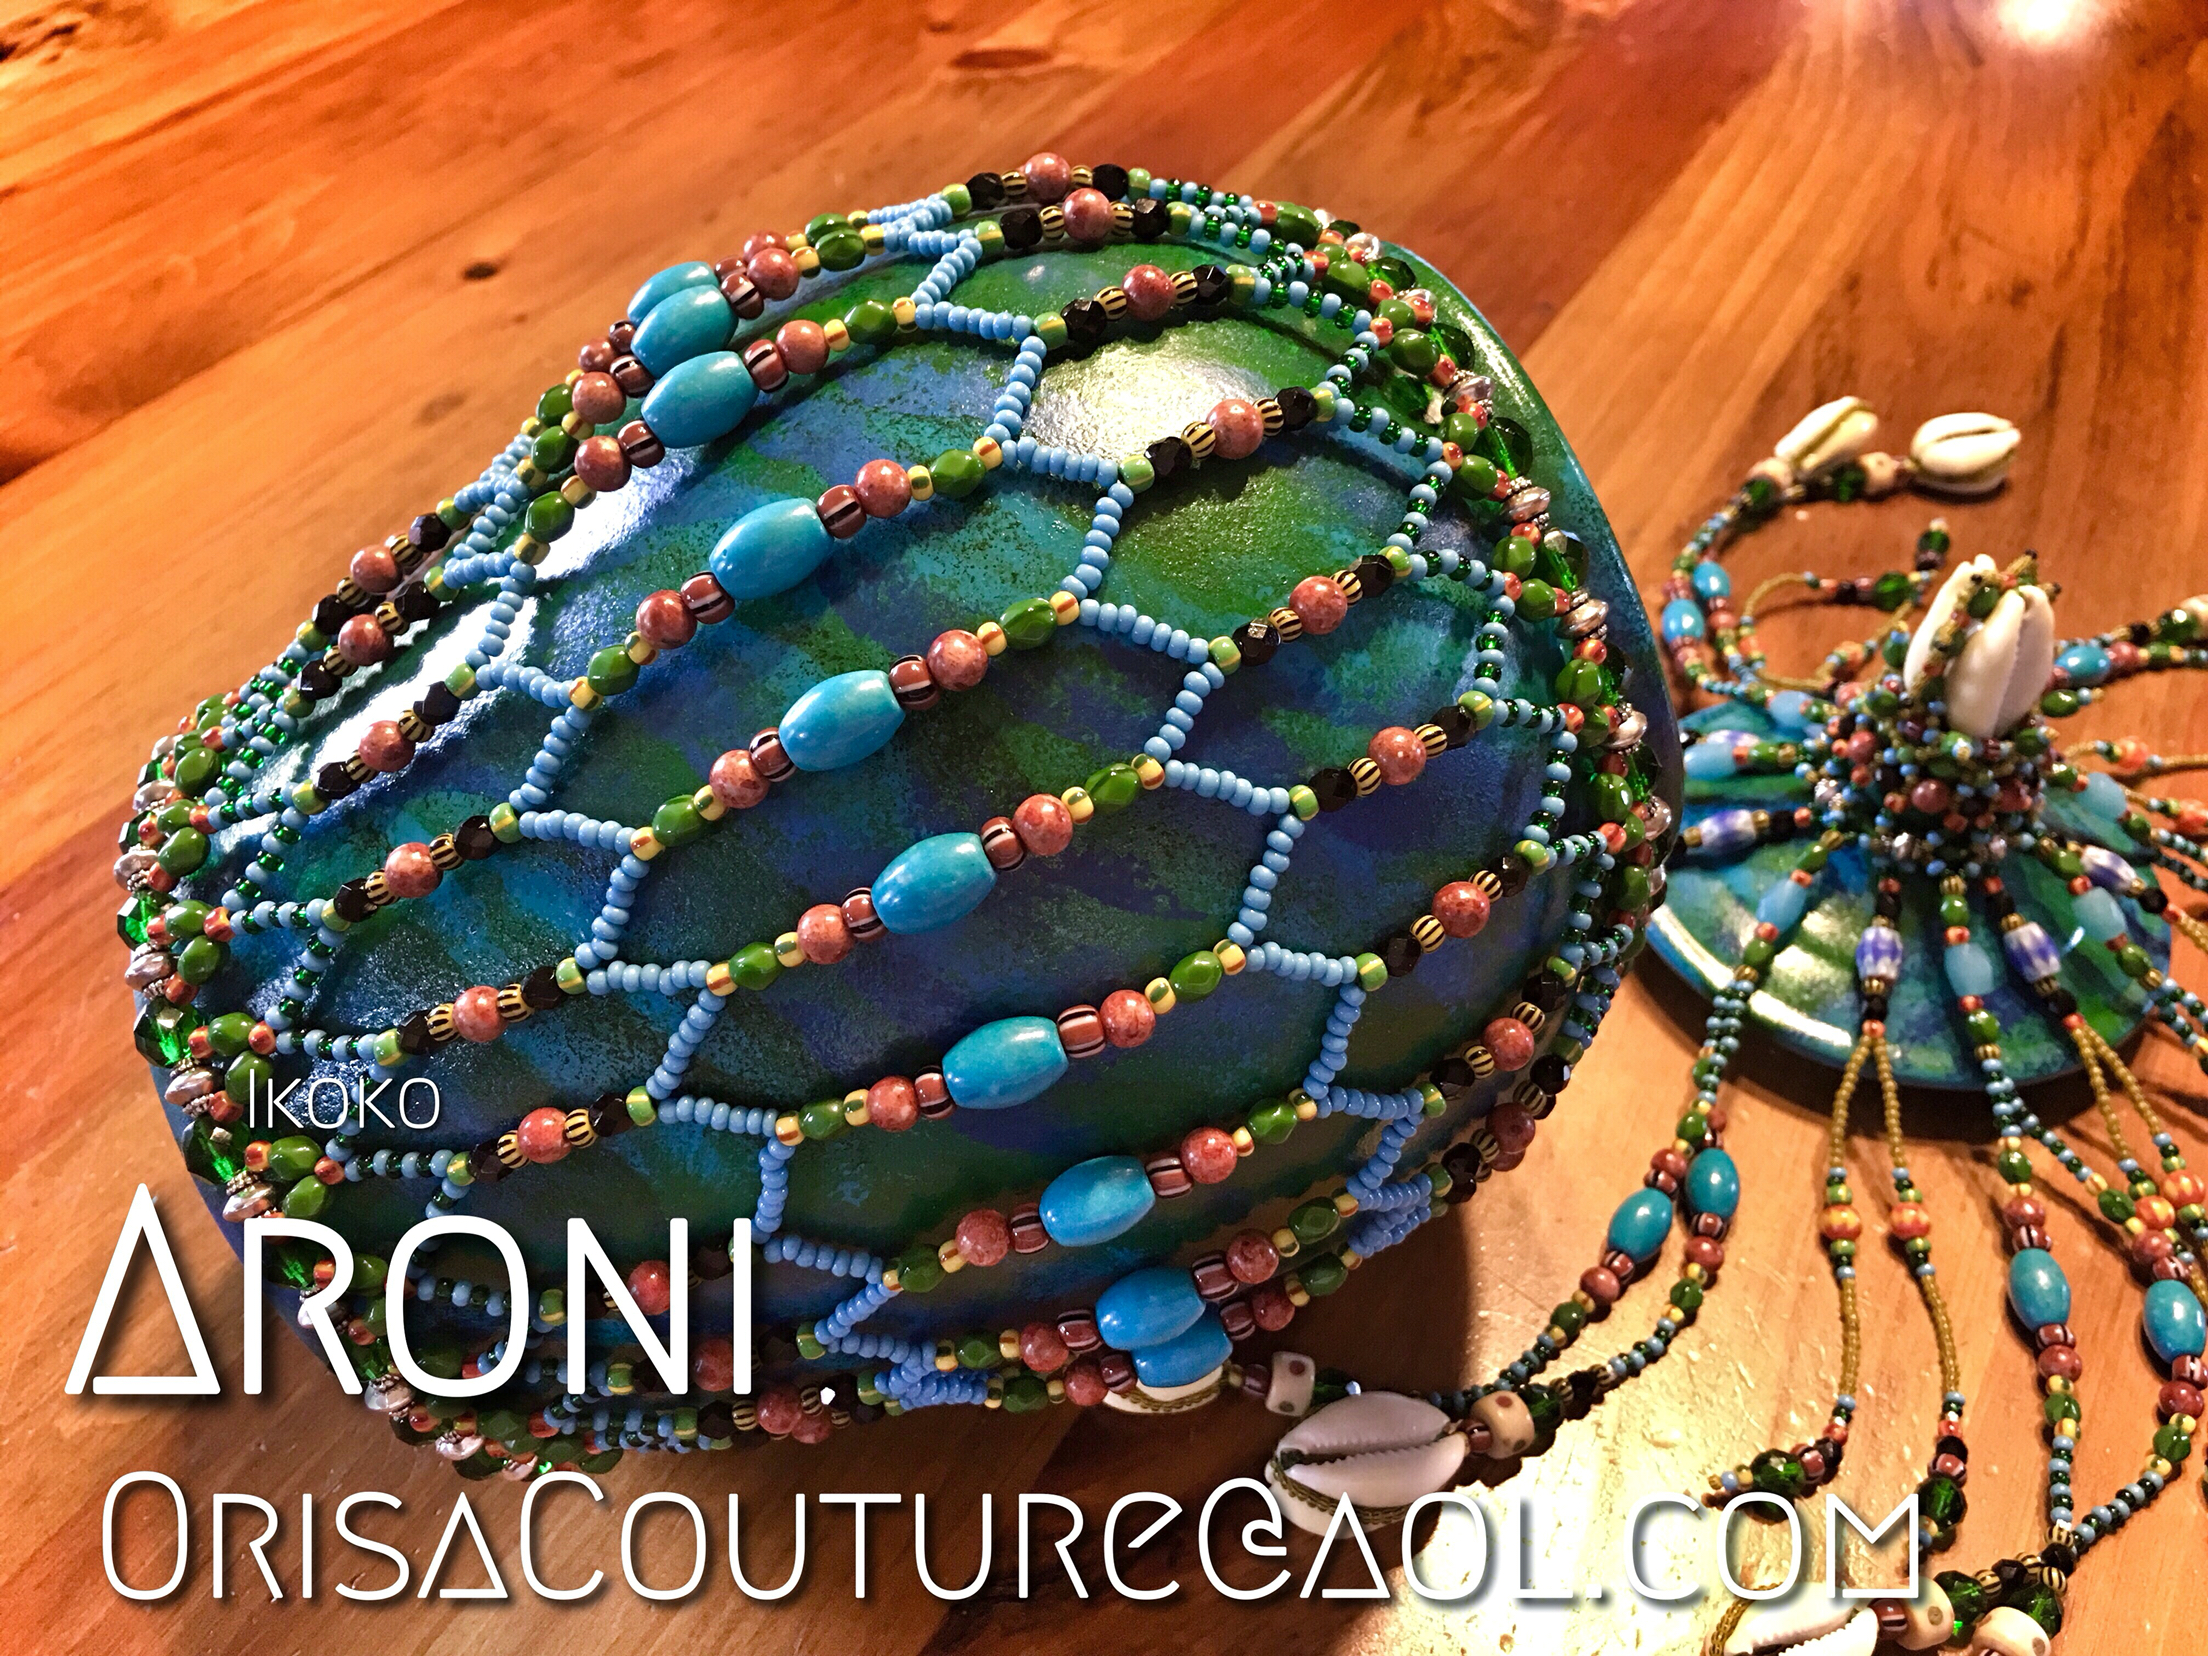 Ikoko Aroni For inquires, please send an e-mail to OrisaCouture@aol ...